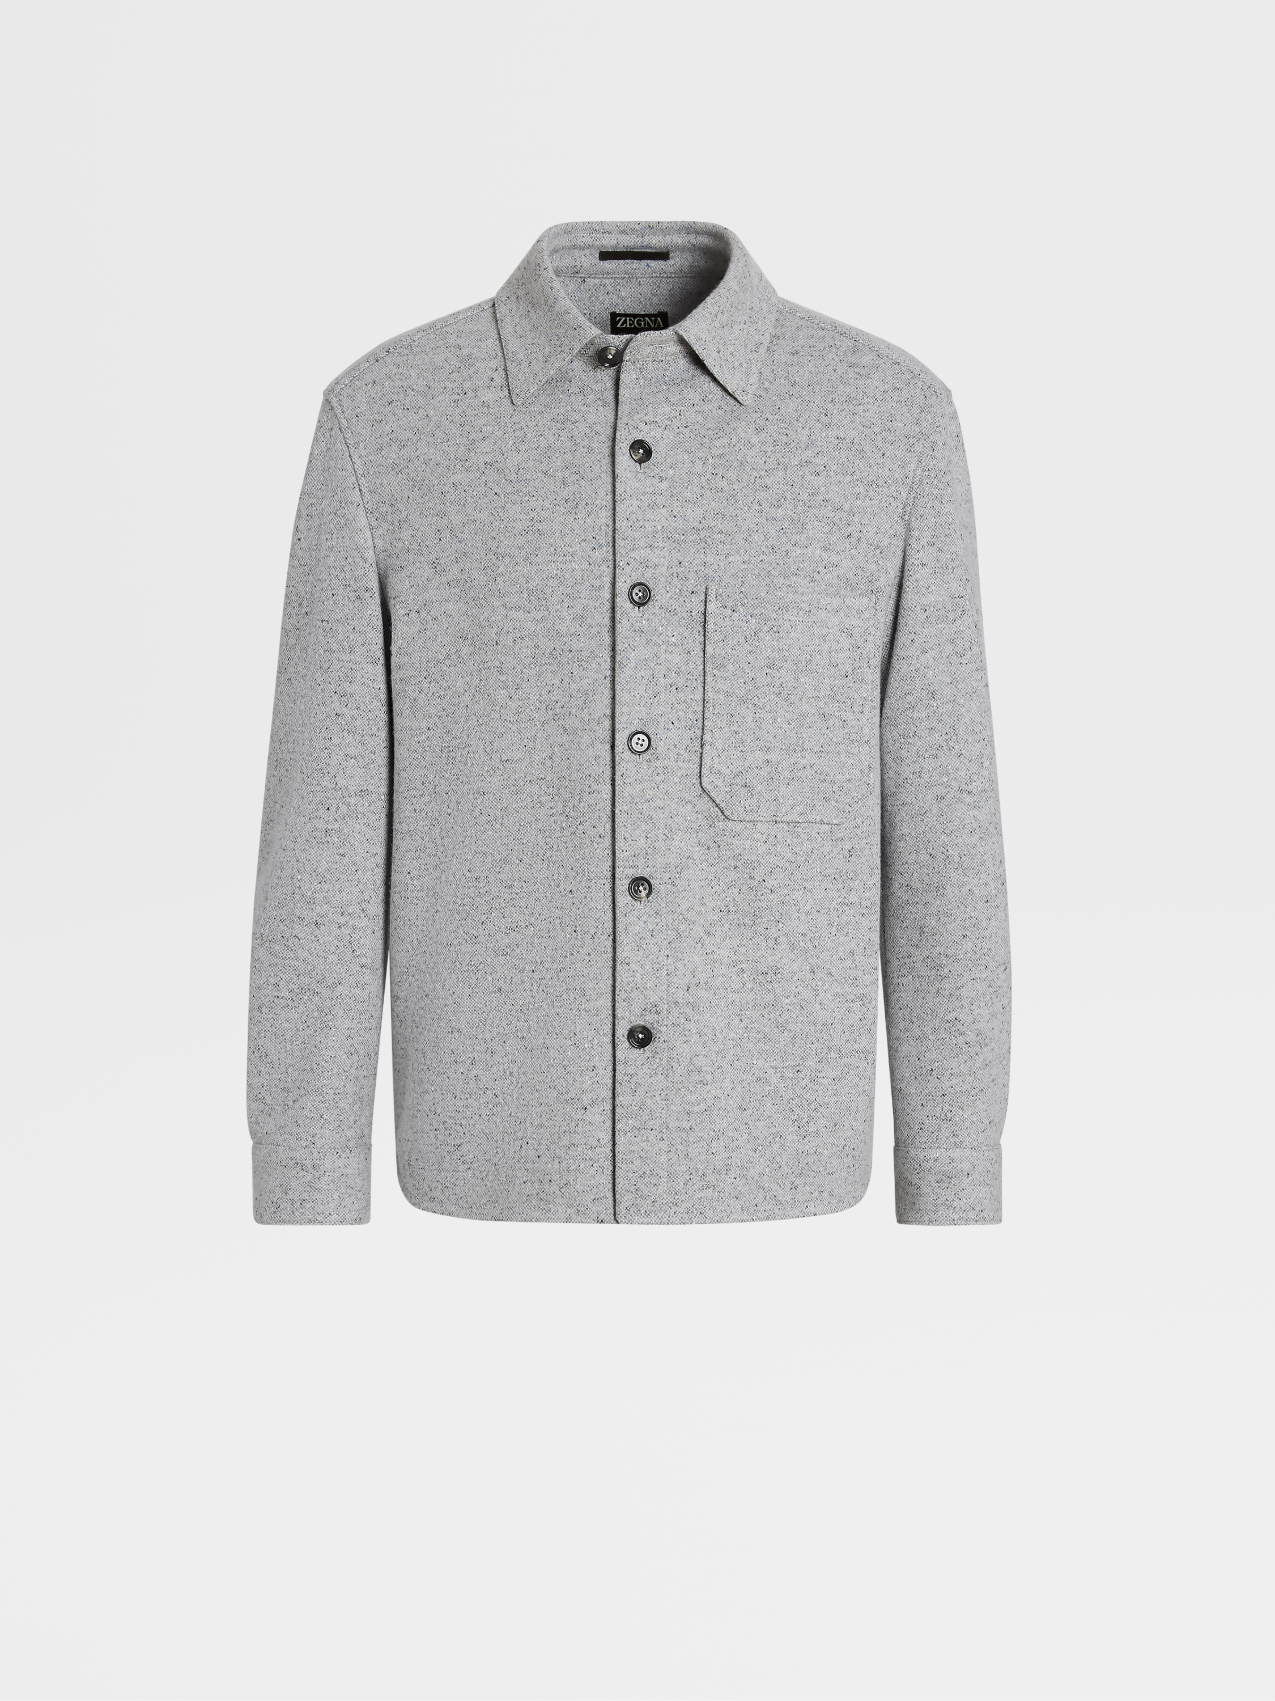 Grey Mélange Wool and Cashmere Blend Overshirt